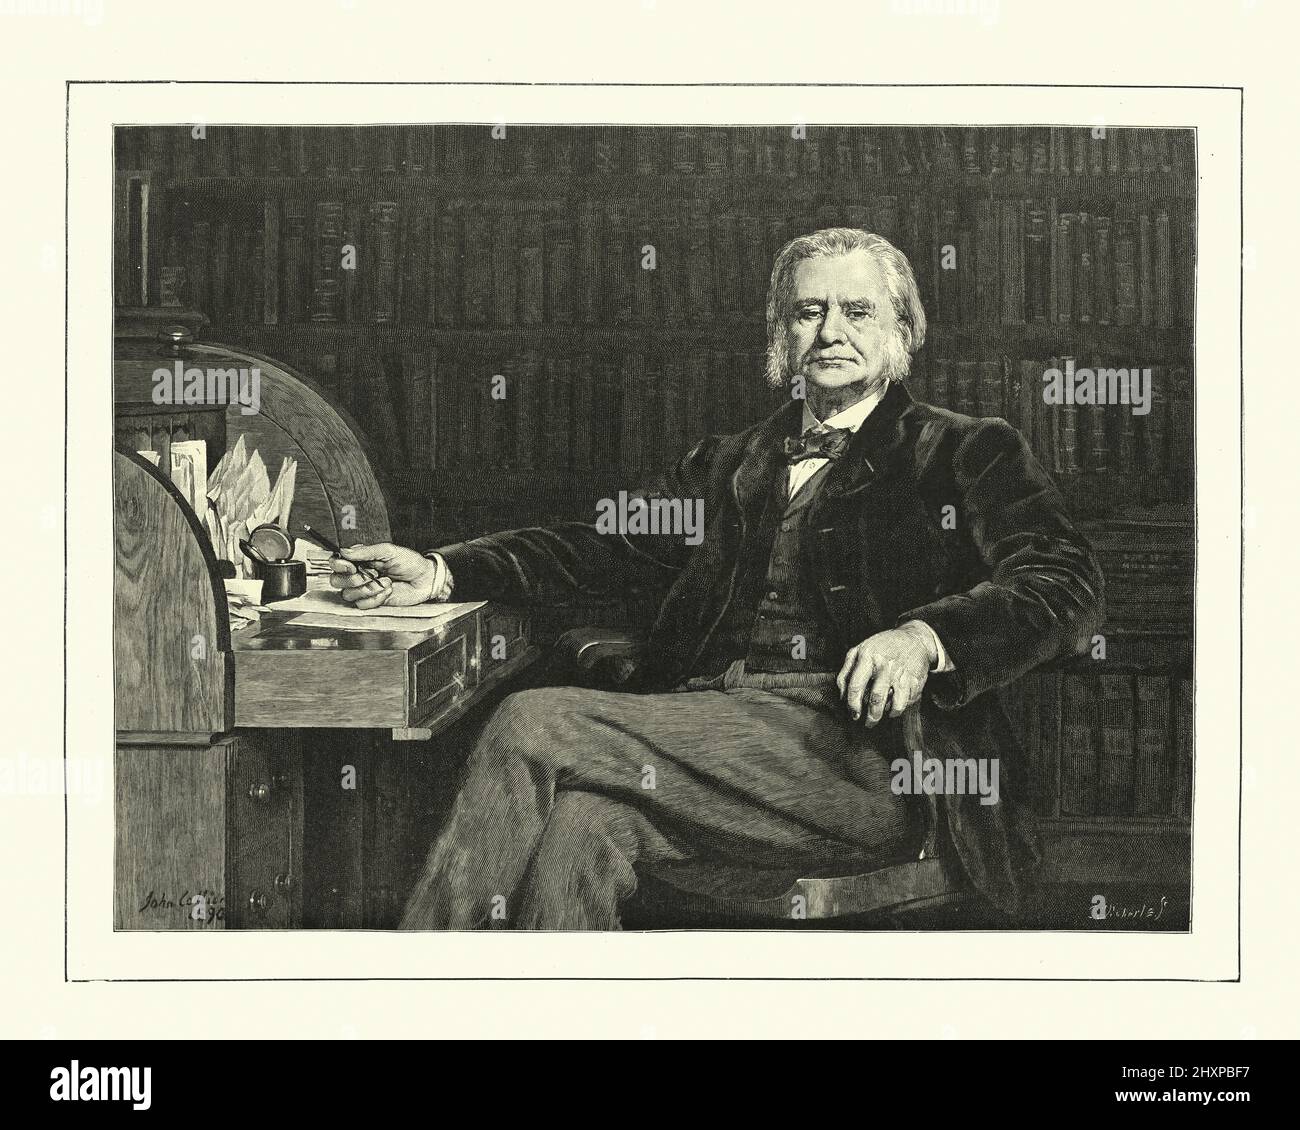 Vintage illustration of Thomas Henry Huxley (4 May 1825 – 29 June 1895) was an English biologist and anthropologist specialising in comparative anatomy. He is known as 'Darwin's Bulldog' for his advocacy of Charles Darwin's theory of evolution. Stock Photo